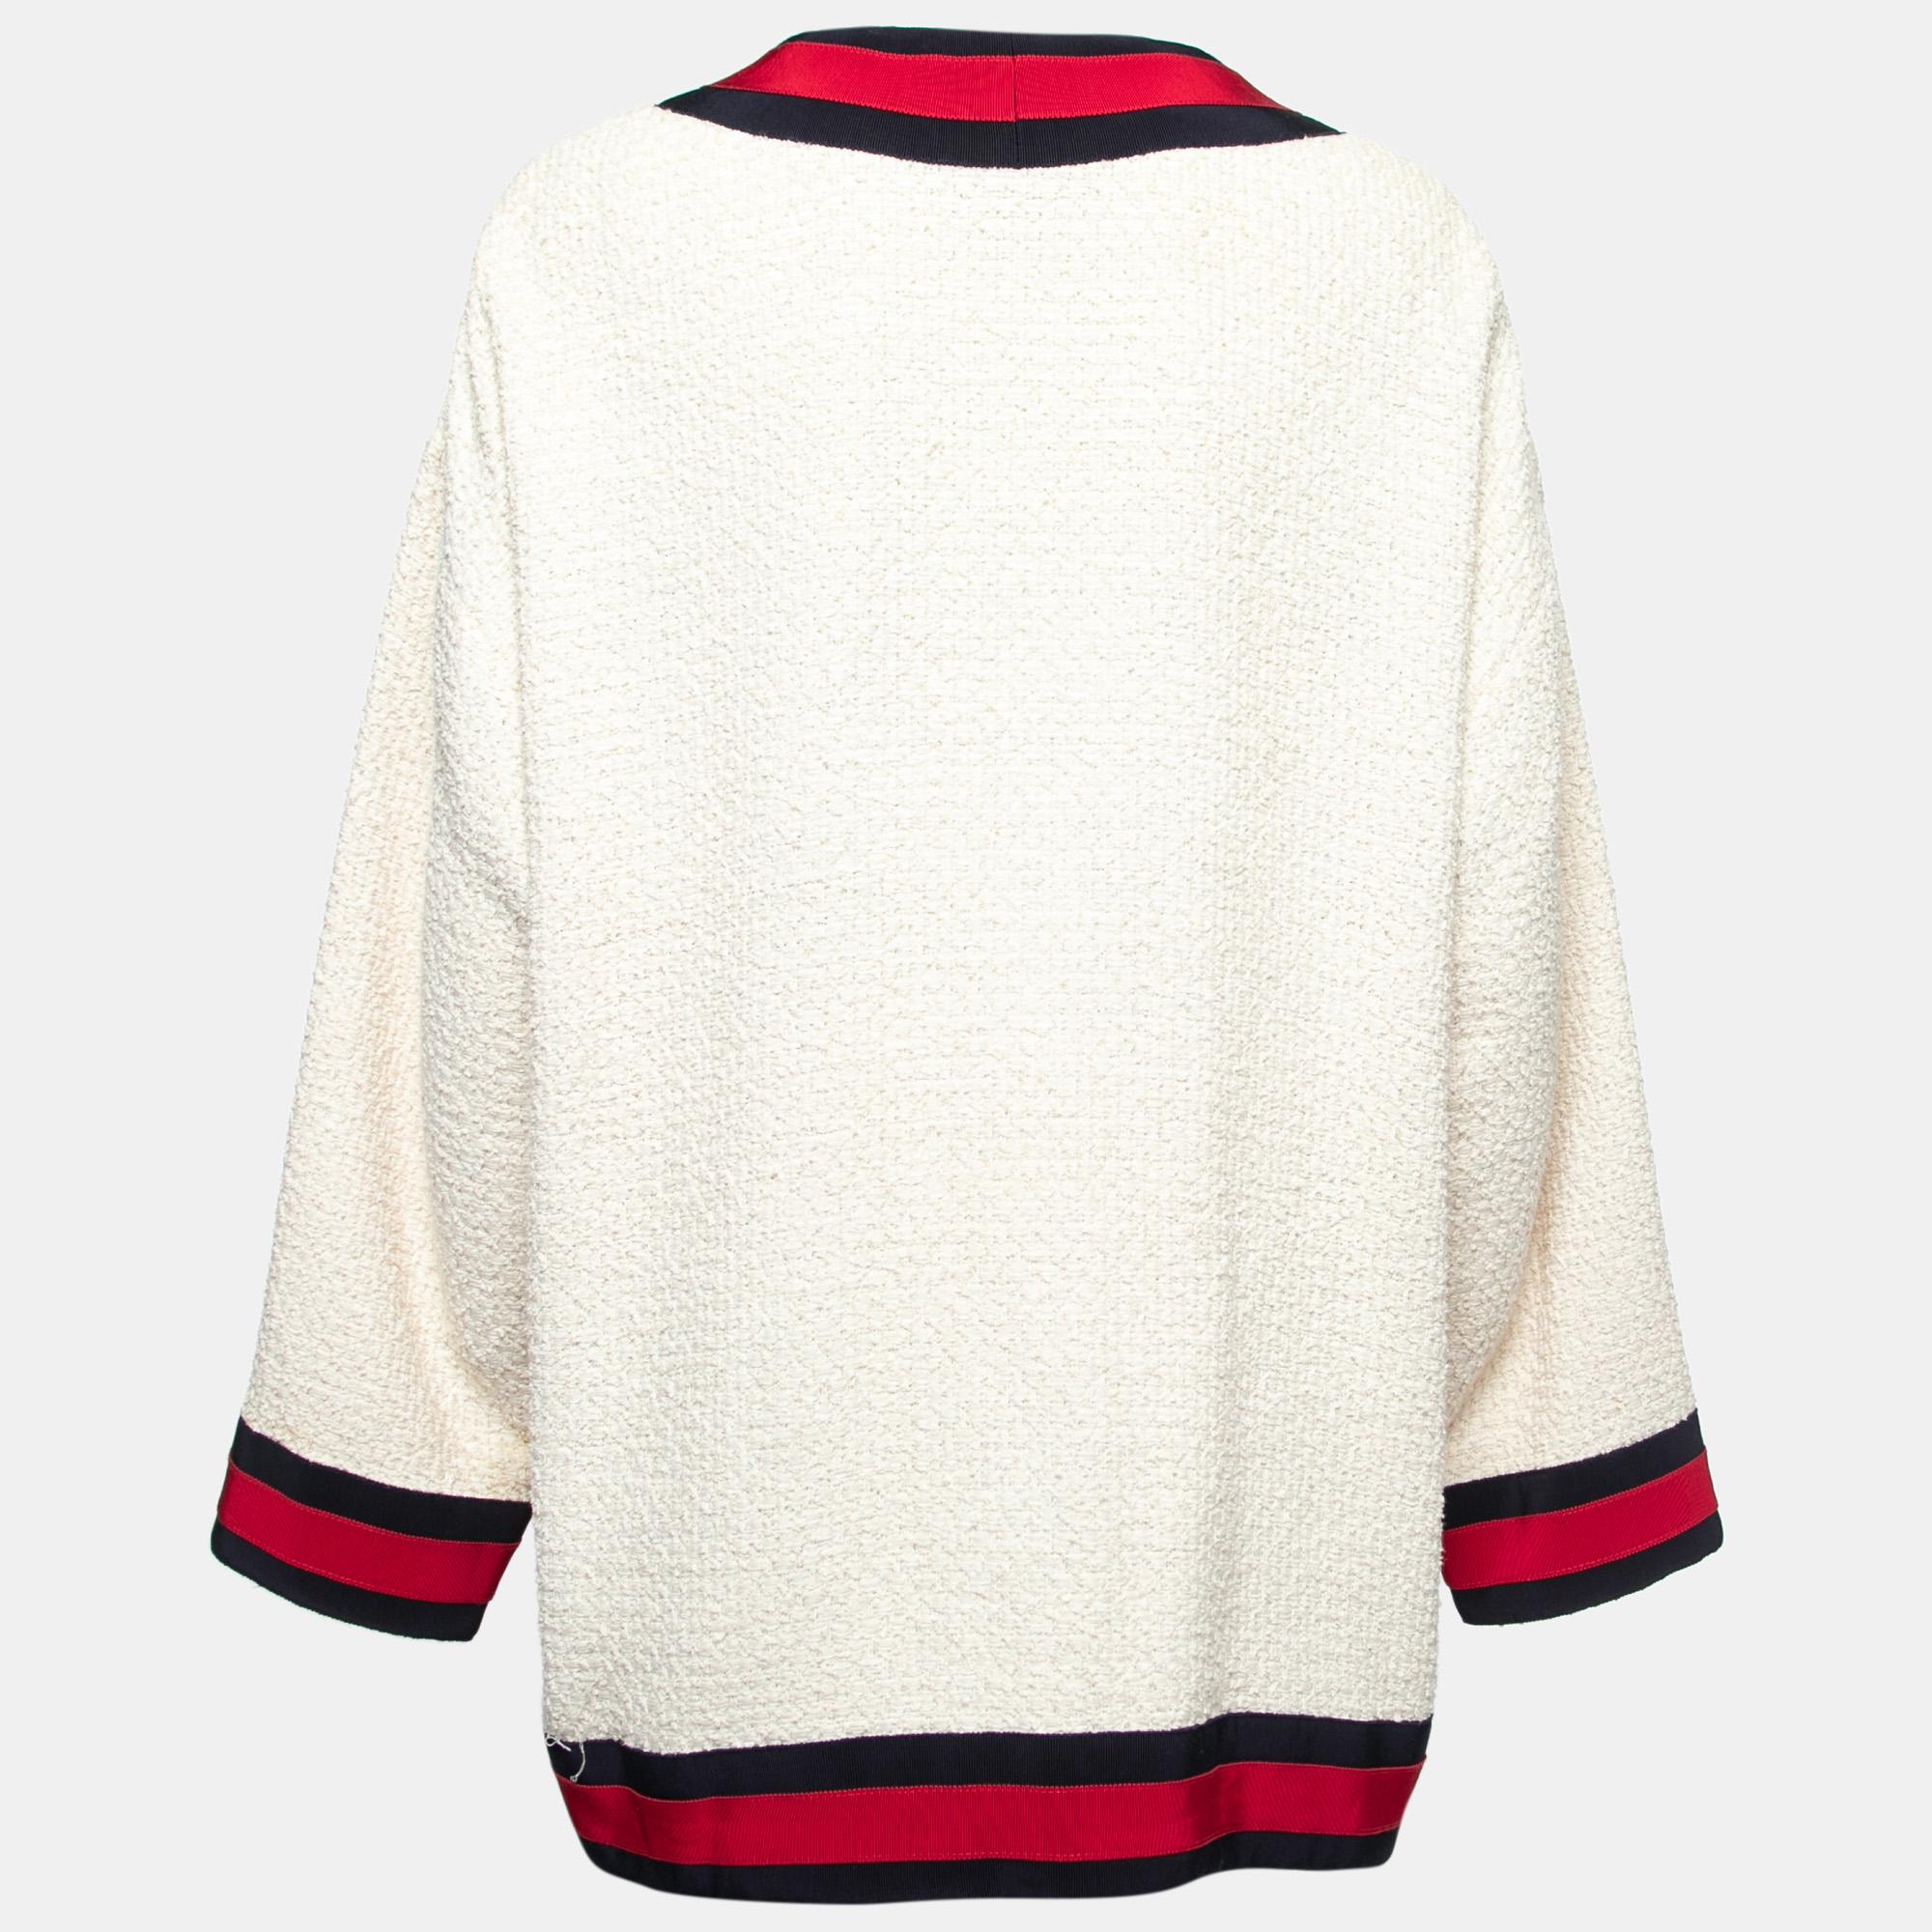 Gucci takes its archival Web and brilliantly fits into the current trend of clothing. Made from tweed fabric, the cardigan comes with a front button closure, an oversized fit, and long sleeves.

